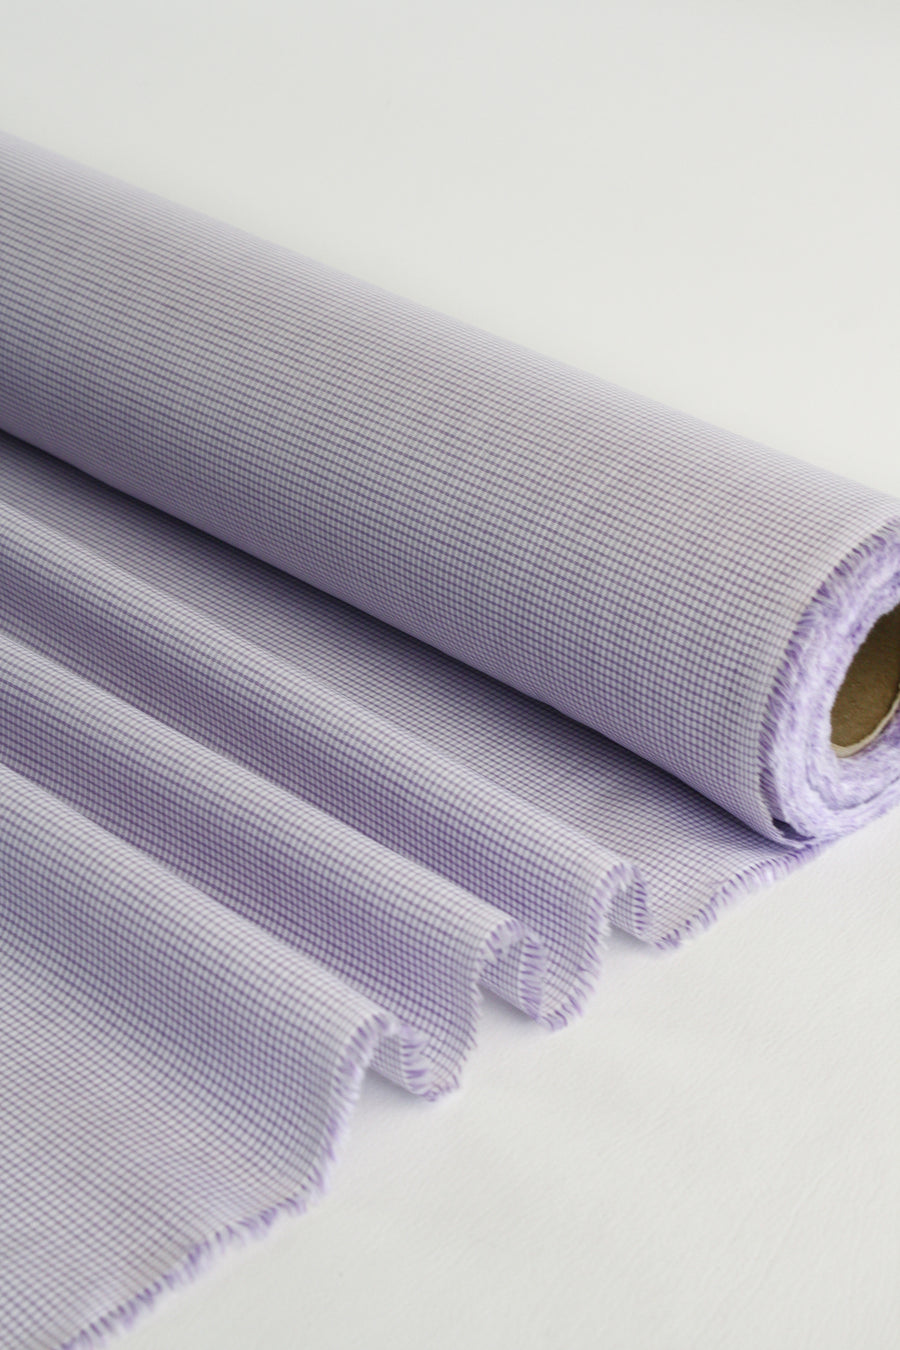 Hitome - Yarn Dyed Cotton | Lilac #1